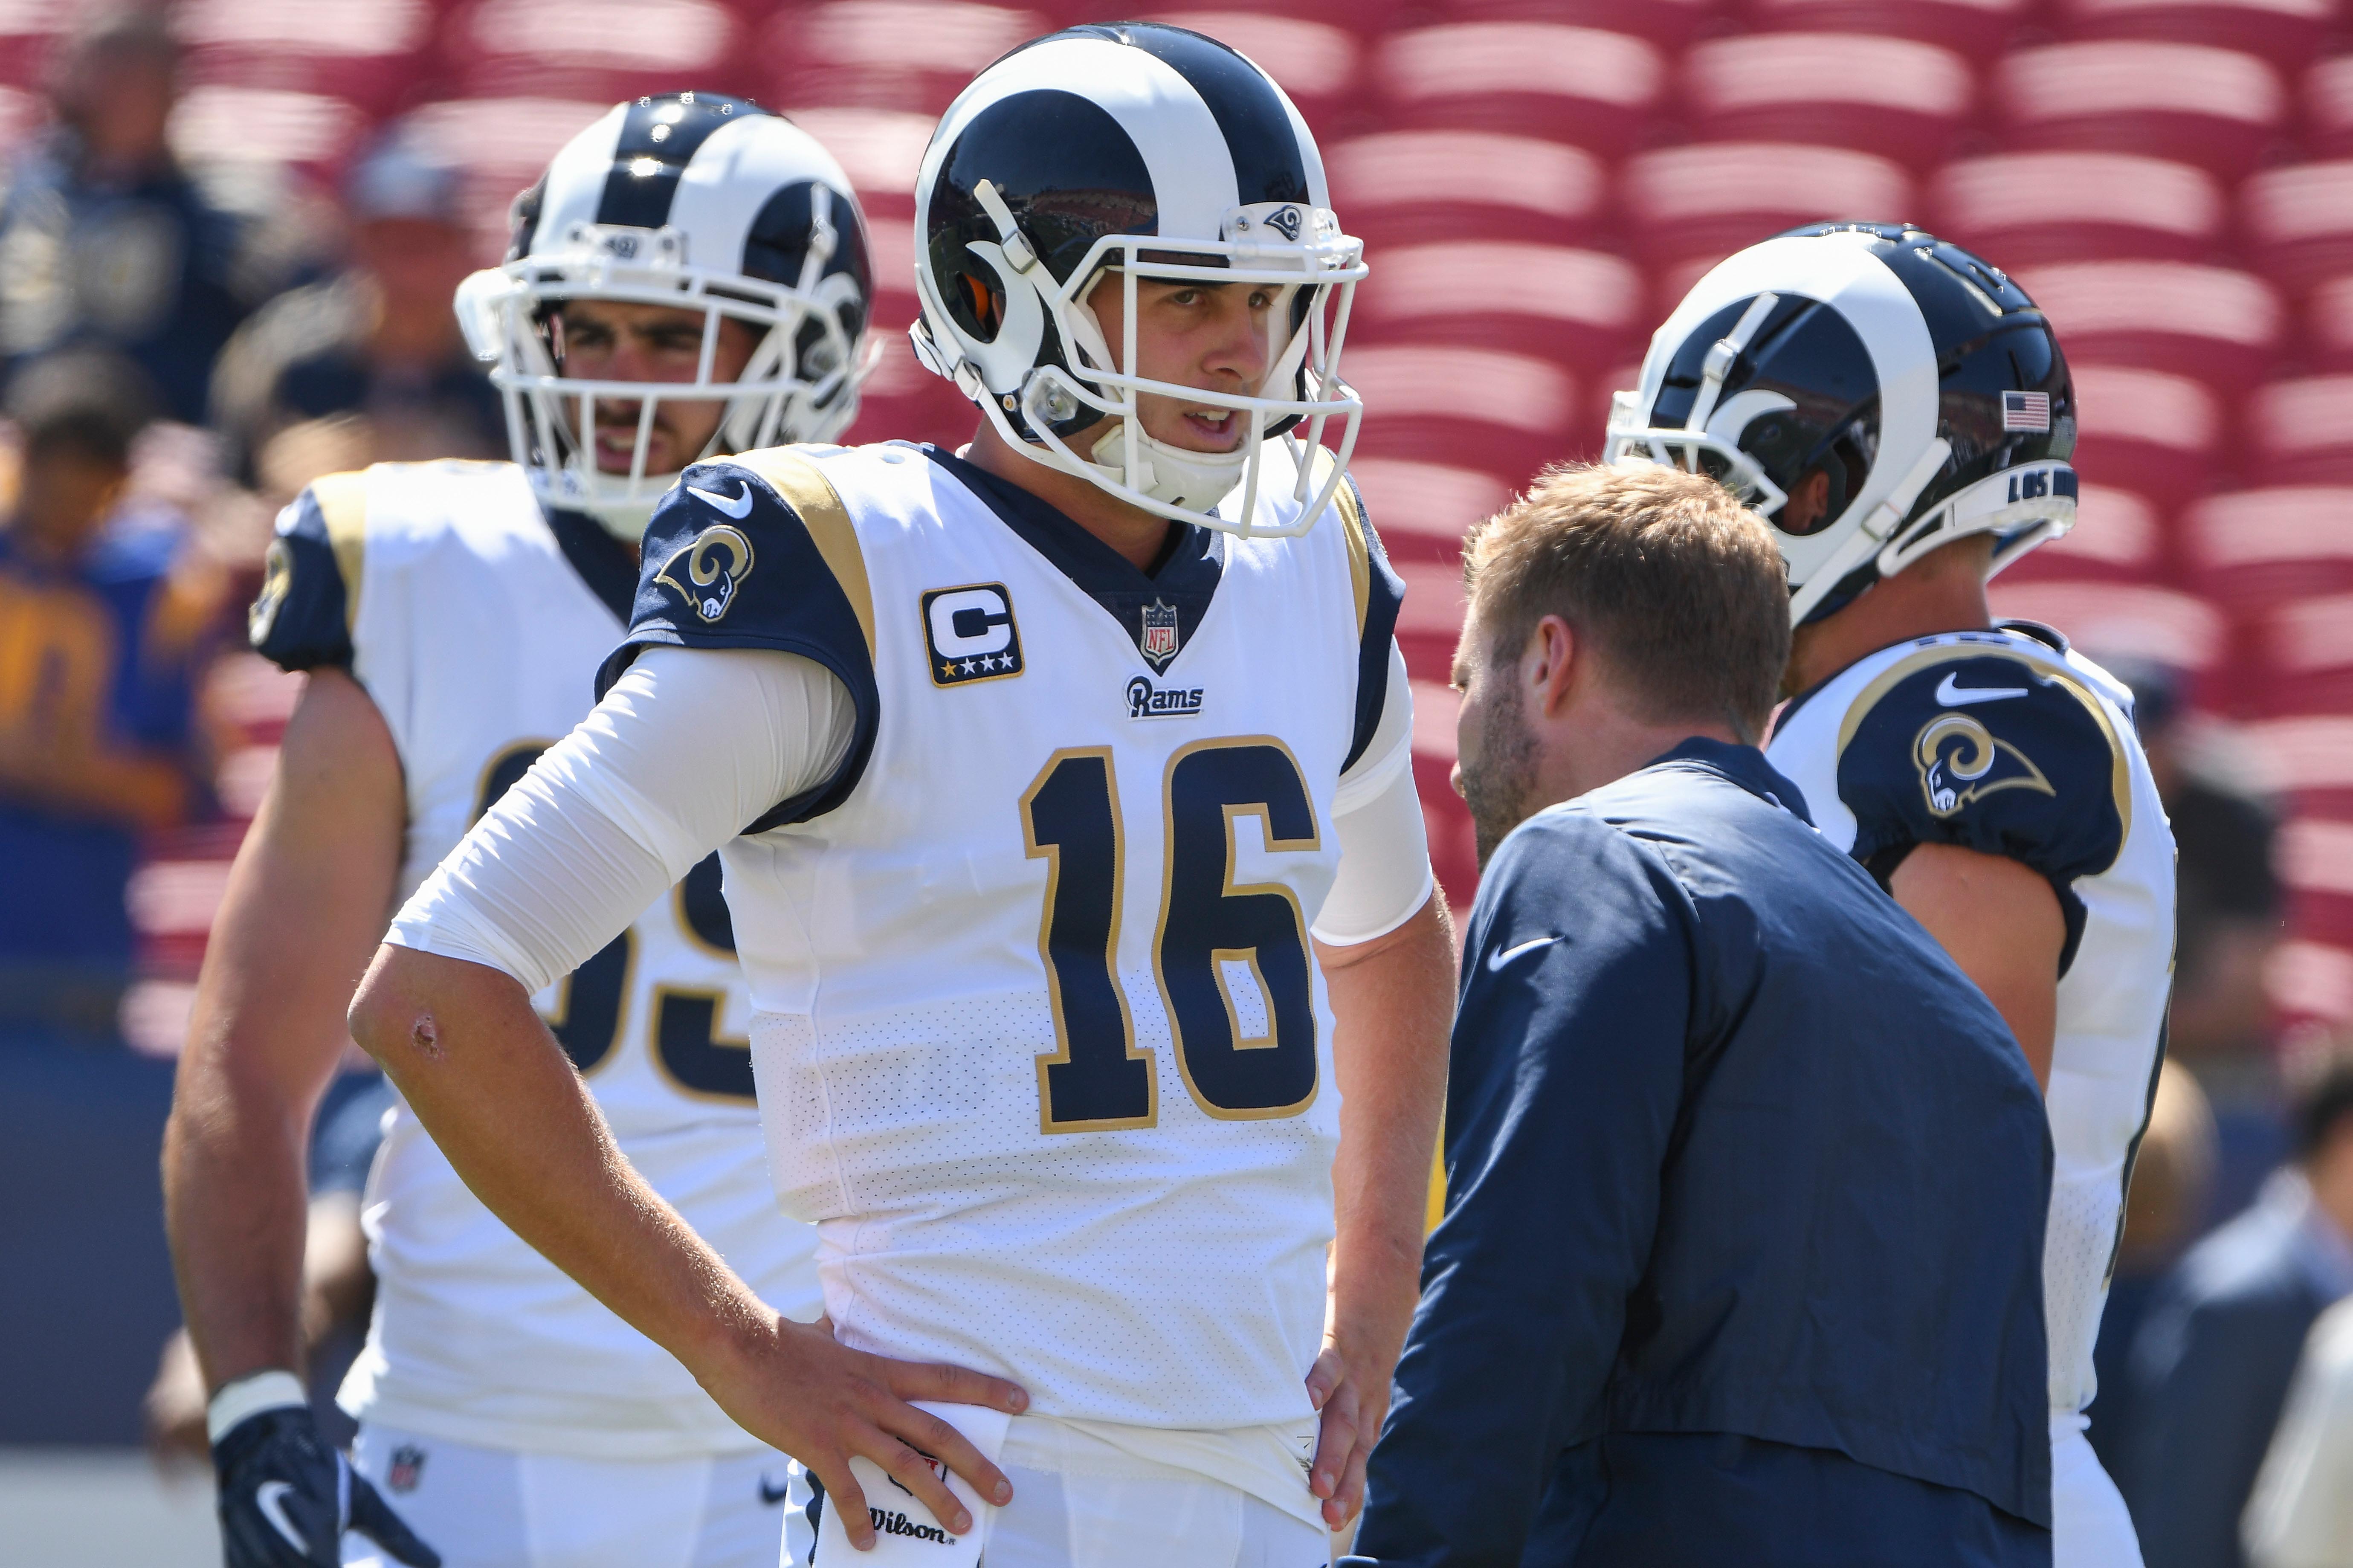 Box Score Breakdown: Numbers to know from Rams vs. Chargers